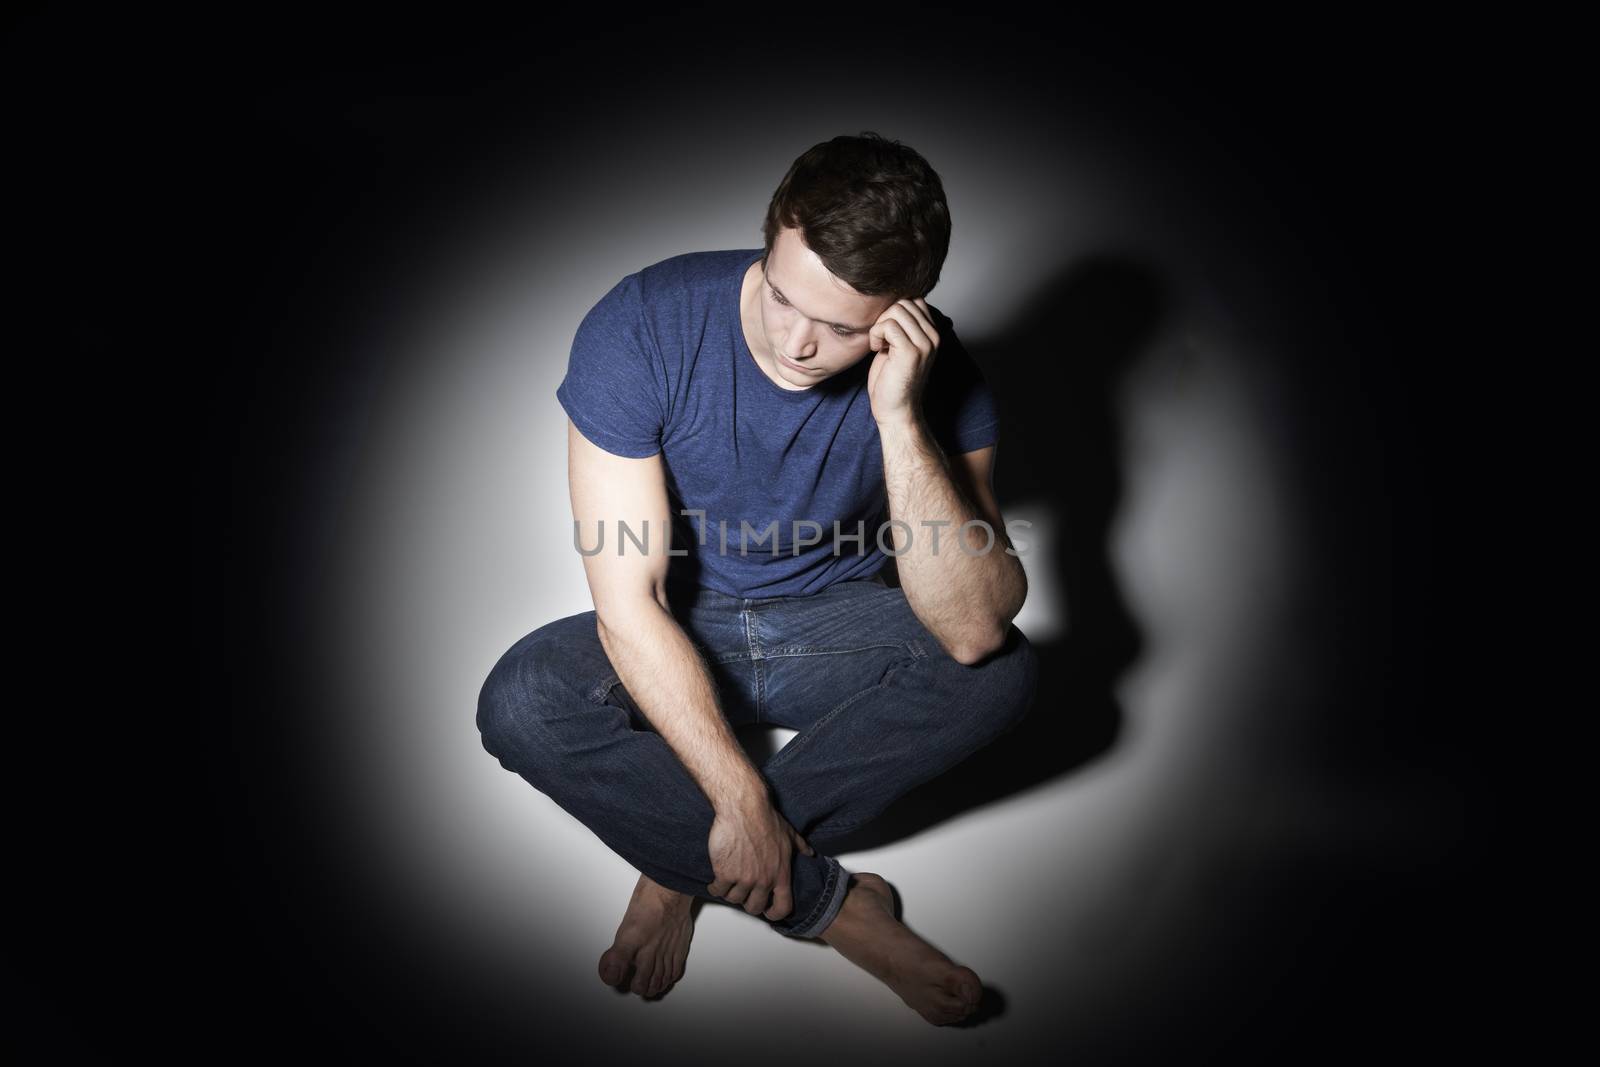 Unhappy Young Man Sitting In Pool Of Light by HWS